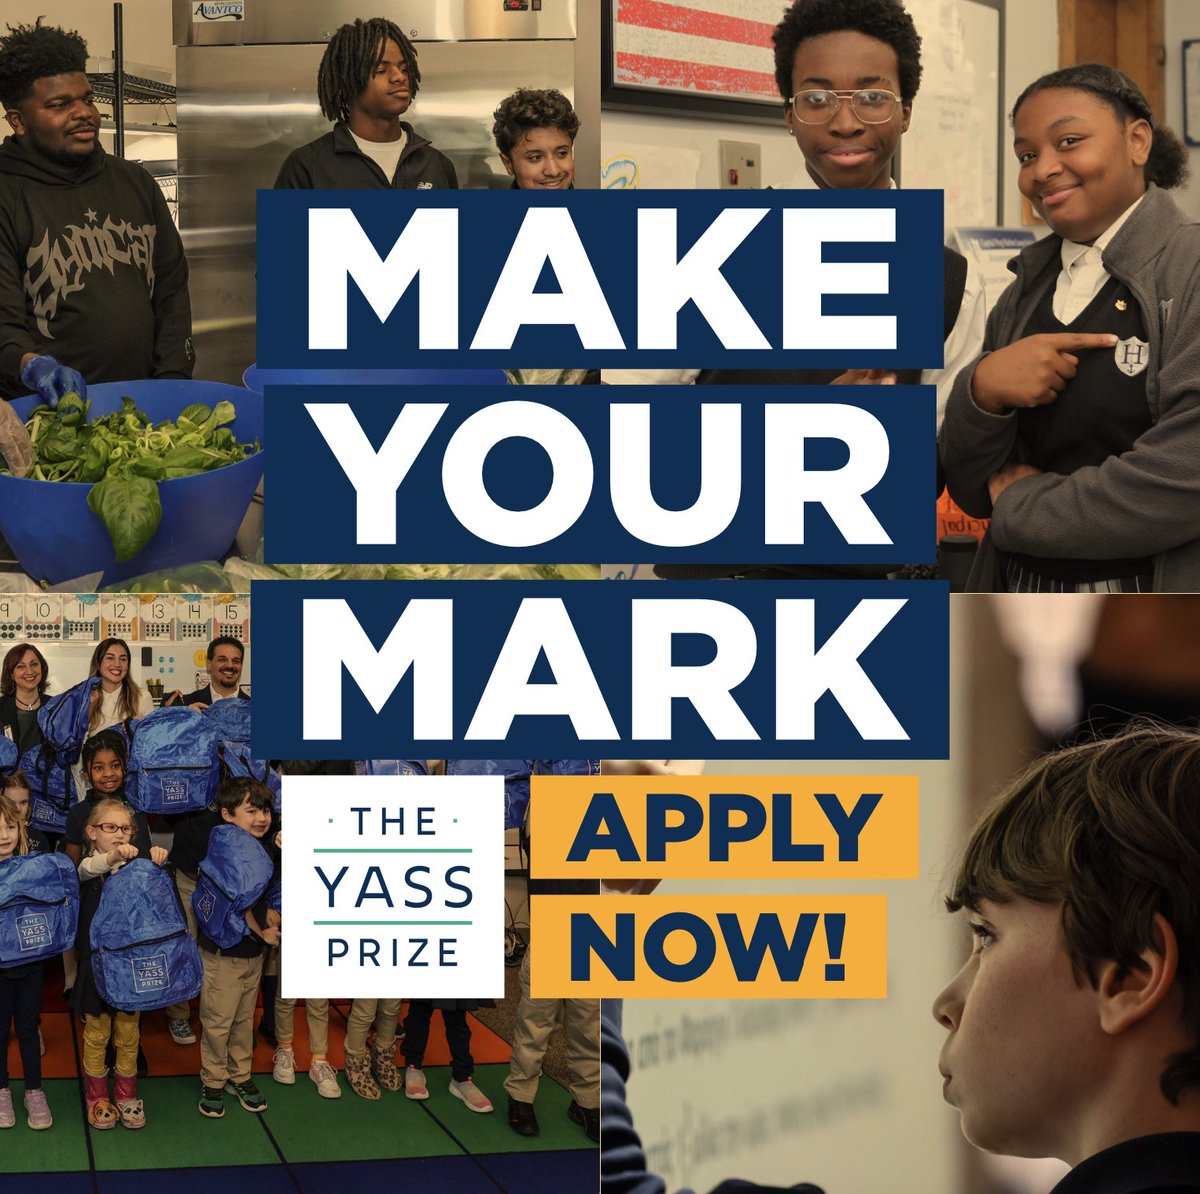 “The Yass Prize is life-changing, not for just myself, but for all of our students and families.” Pastor Wade Moore, @upawichita We are officially one week away from the April 18th #YassPrize application deadline. Now is the time to apply! yassprize.org